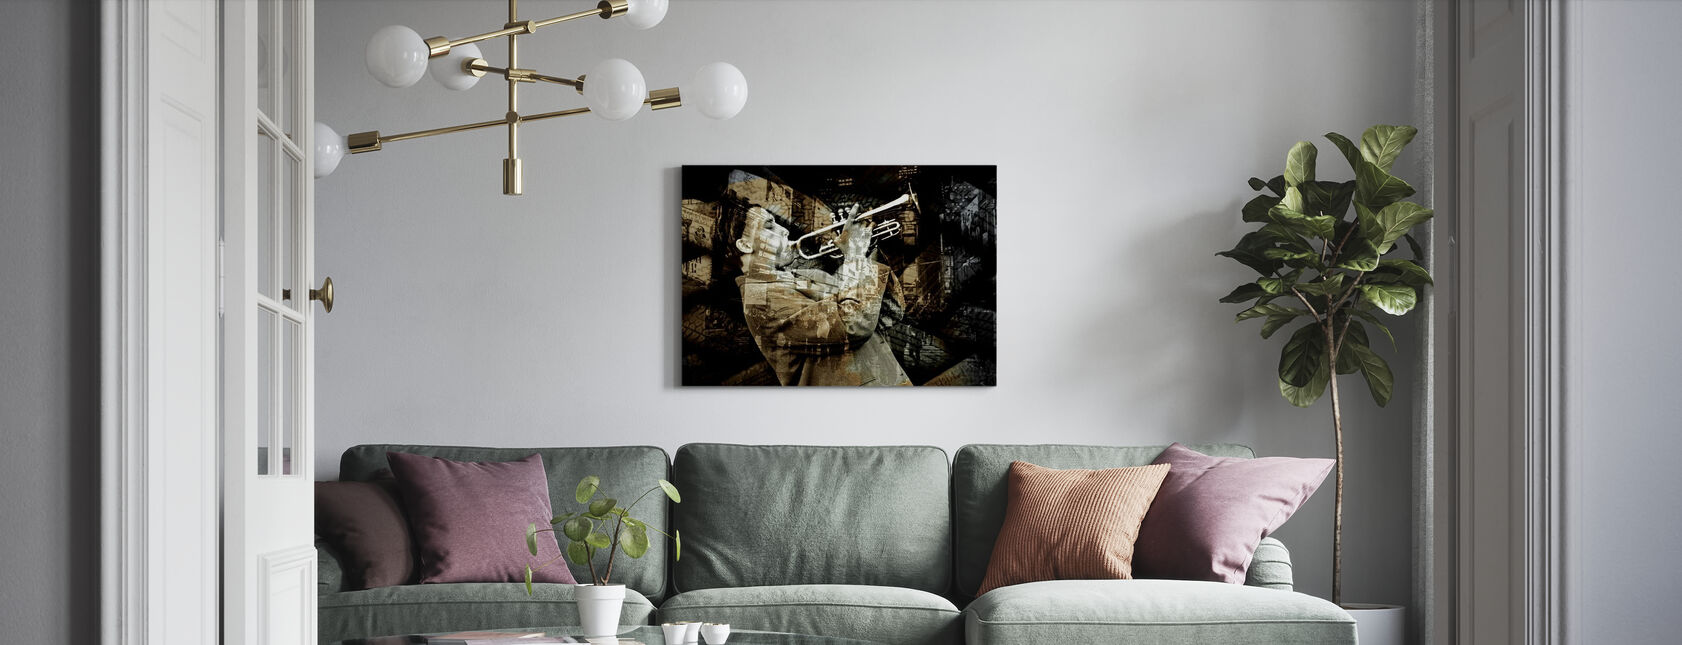 All The Jazz - Canvas print - Living Room